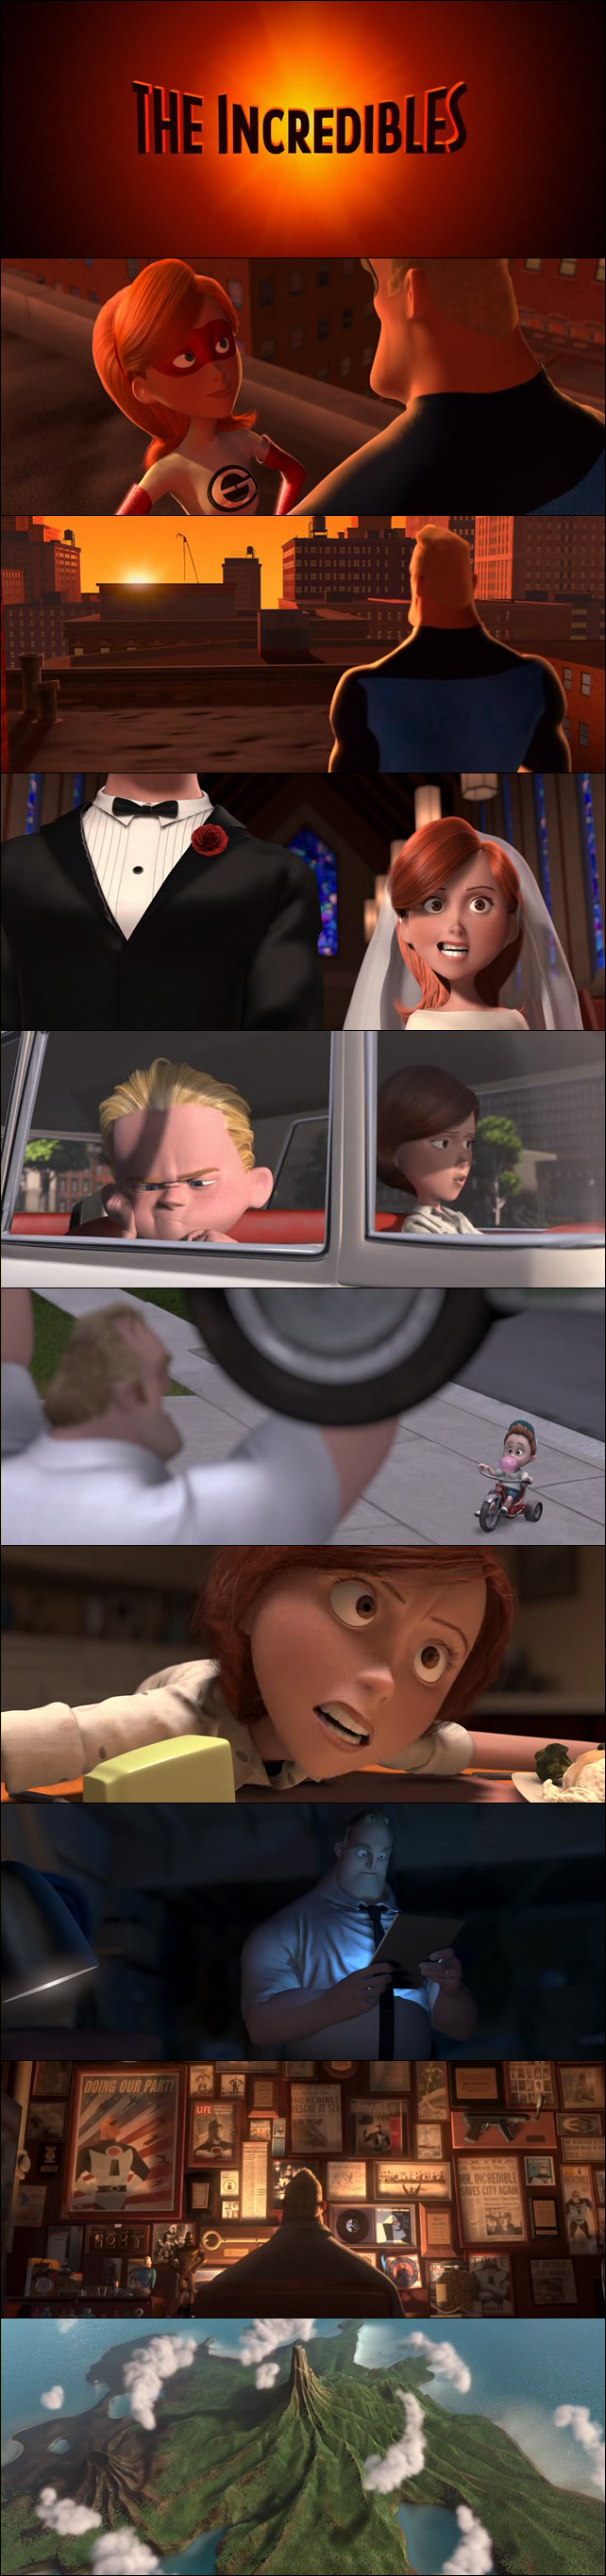 the_incredibles_capture01.jpg